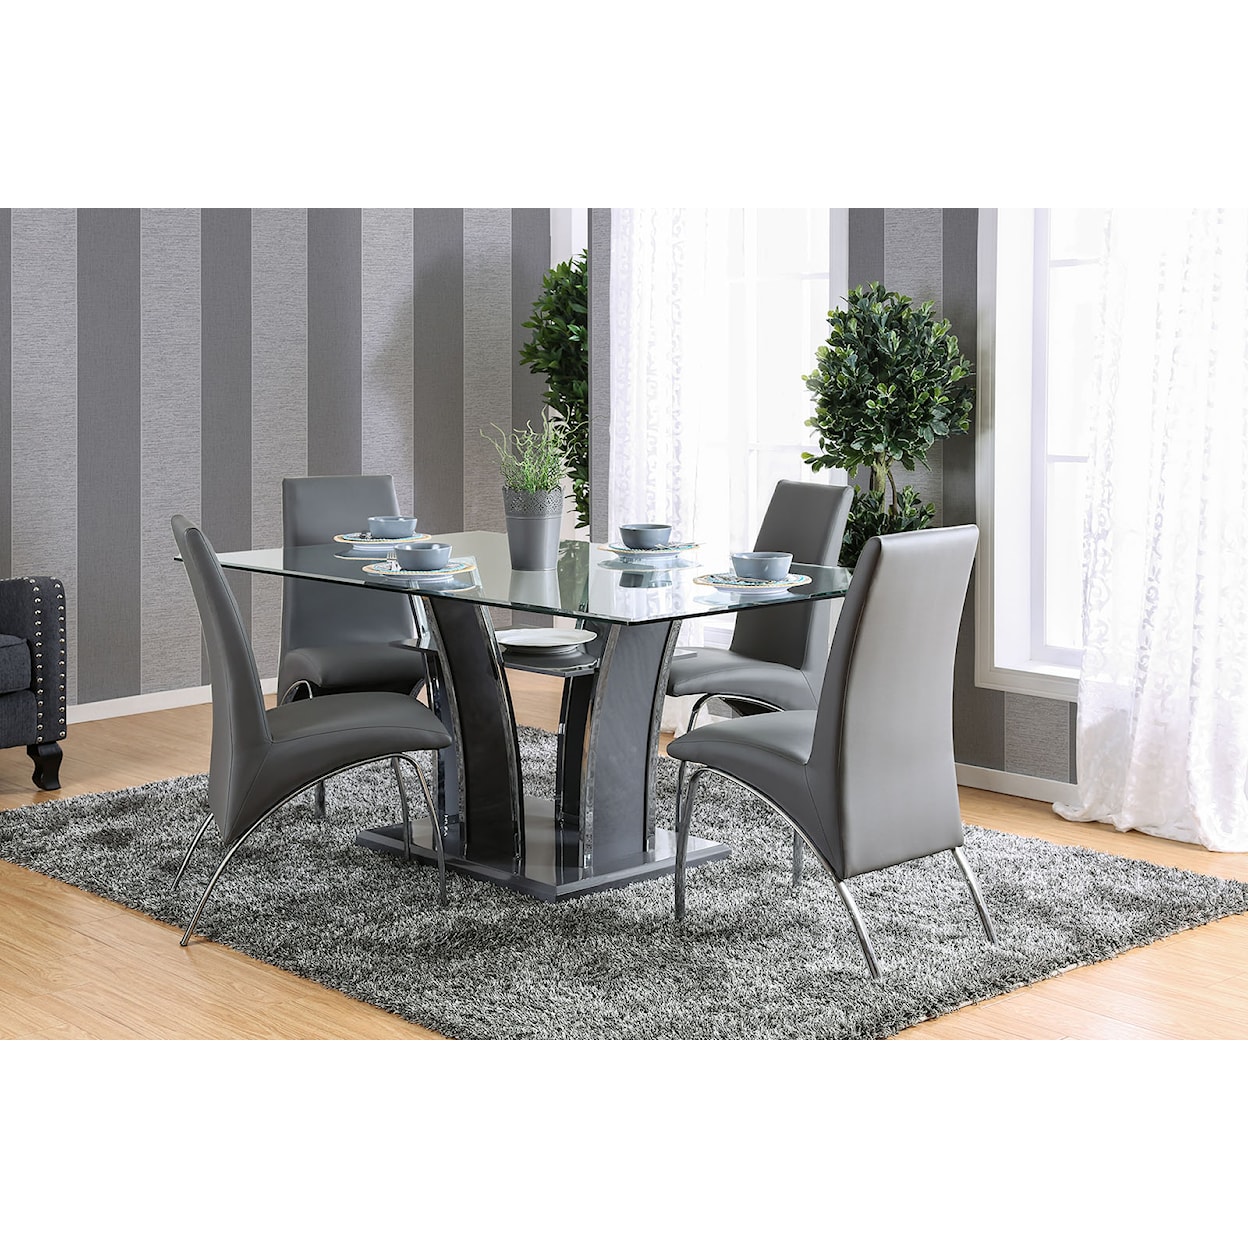 Furniture of America Glenview 7-Piece Dining Set